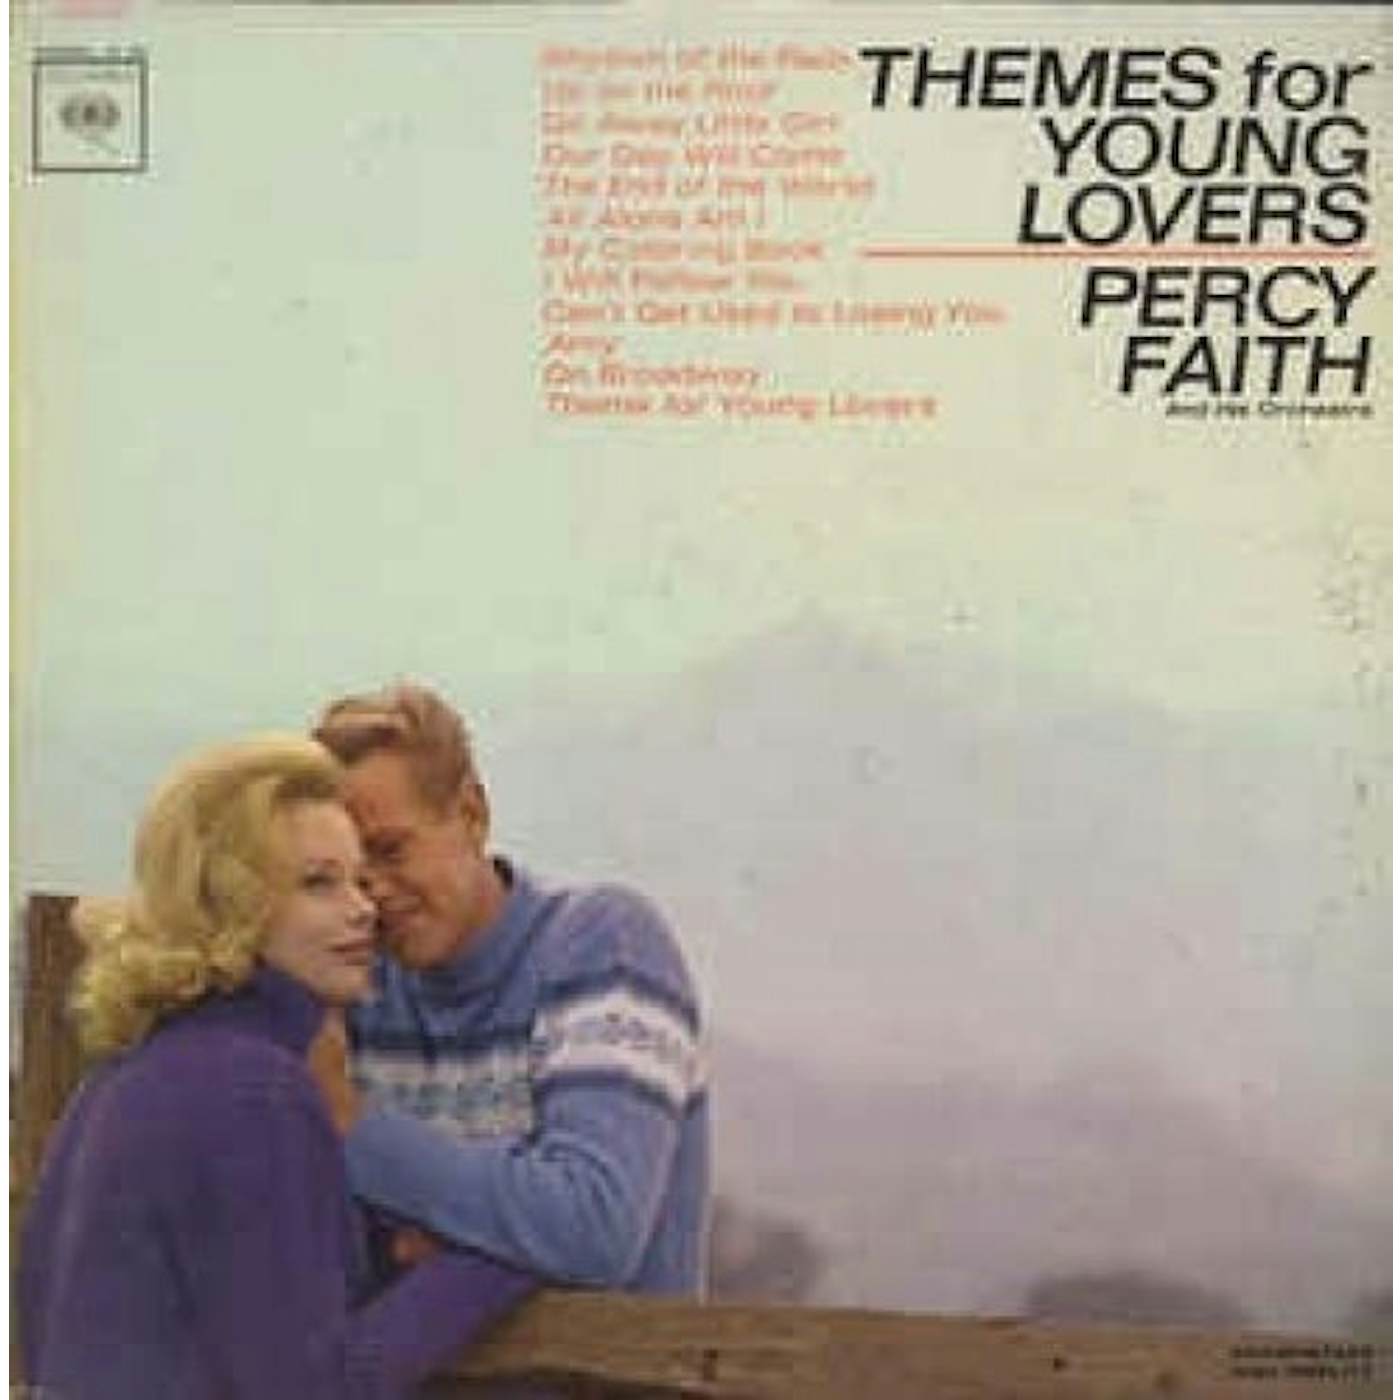 Percy Faith TODAY'S THEMES FOR YOUNG LOVERS CD